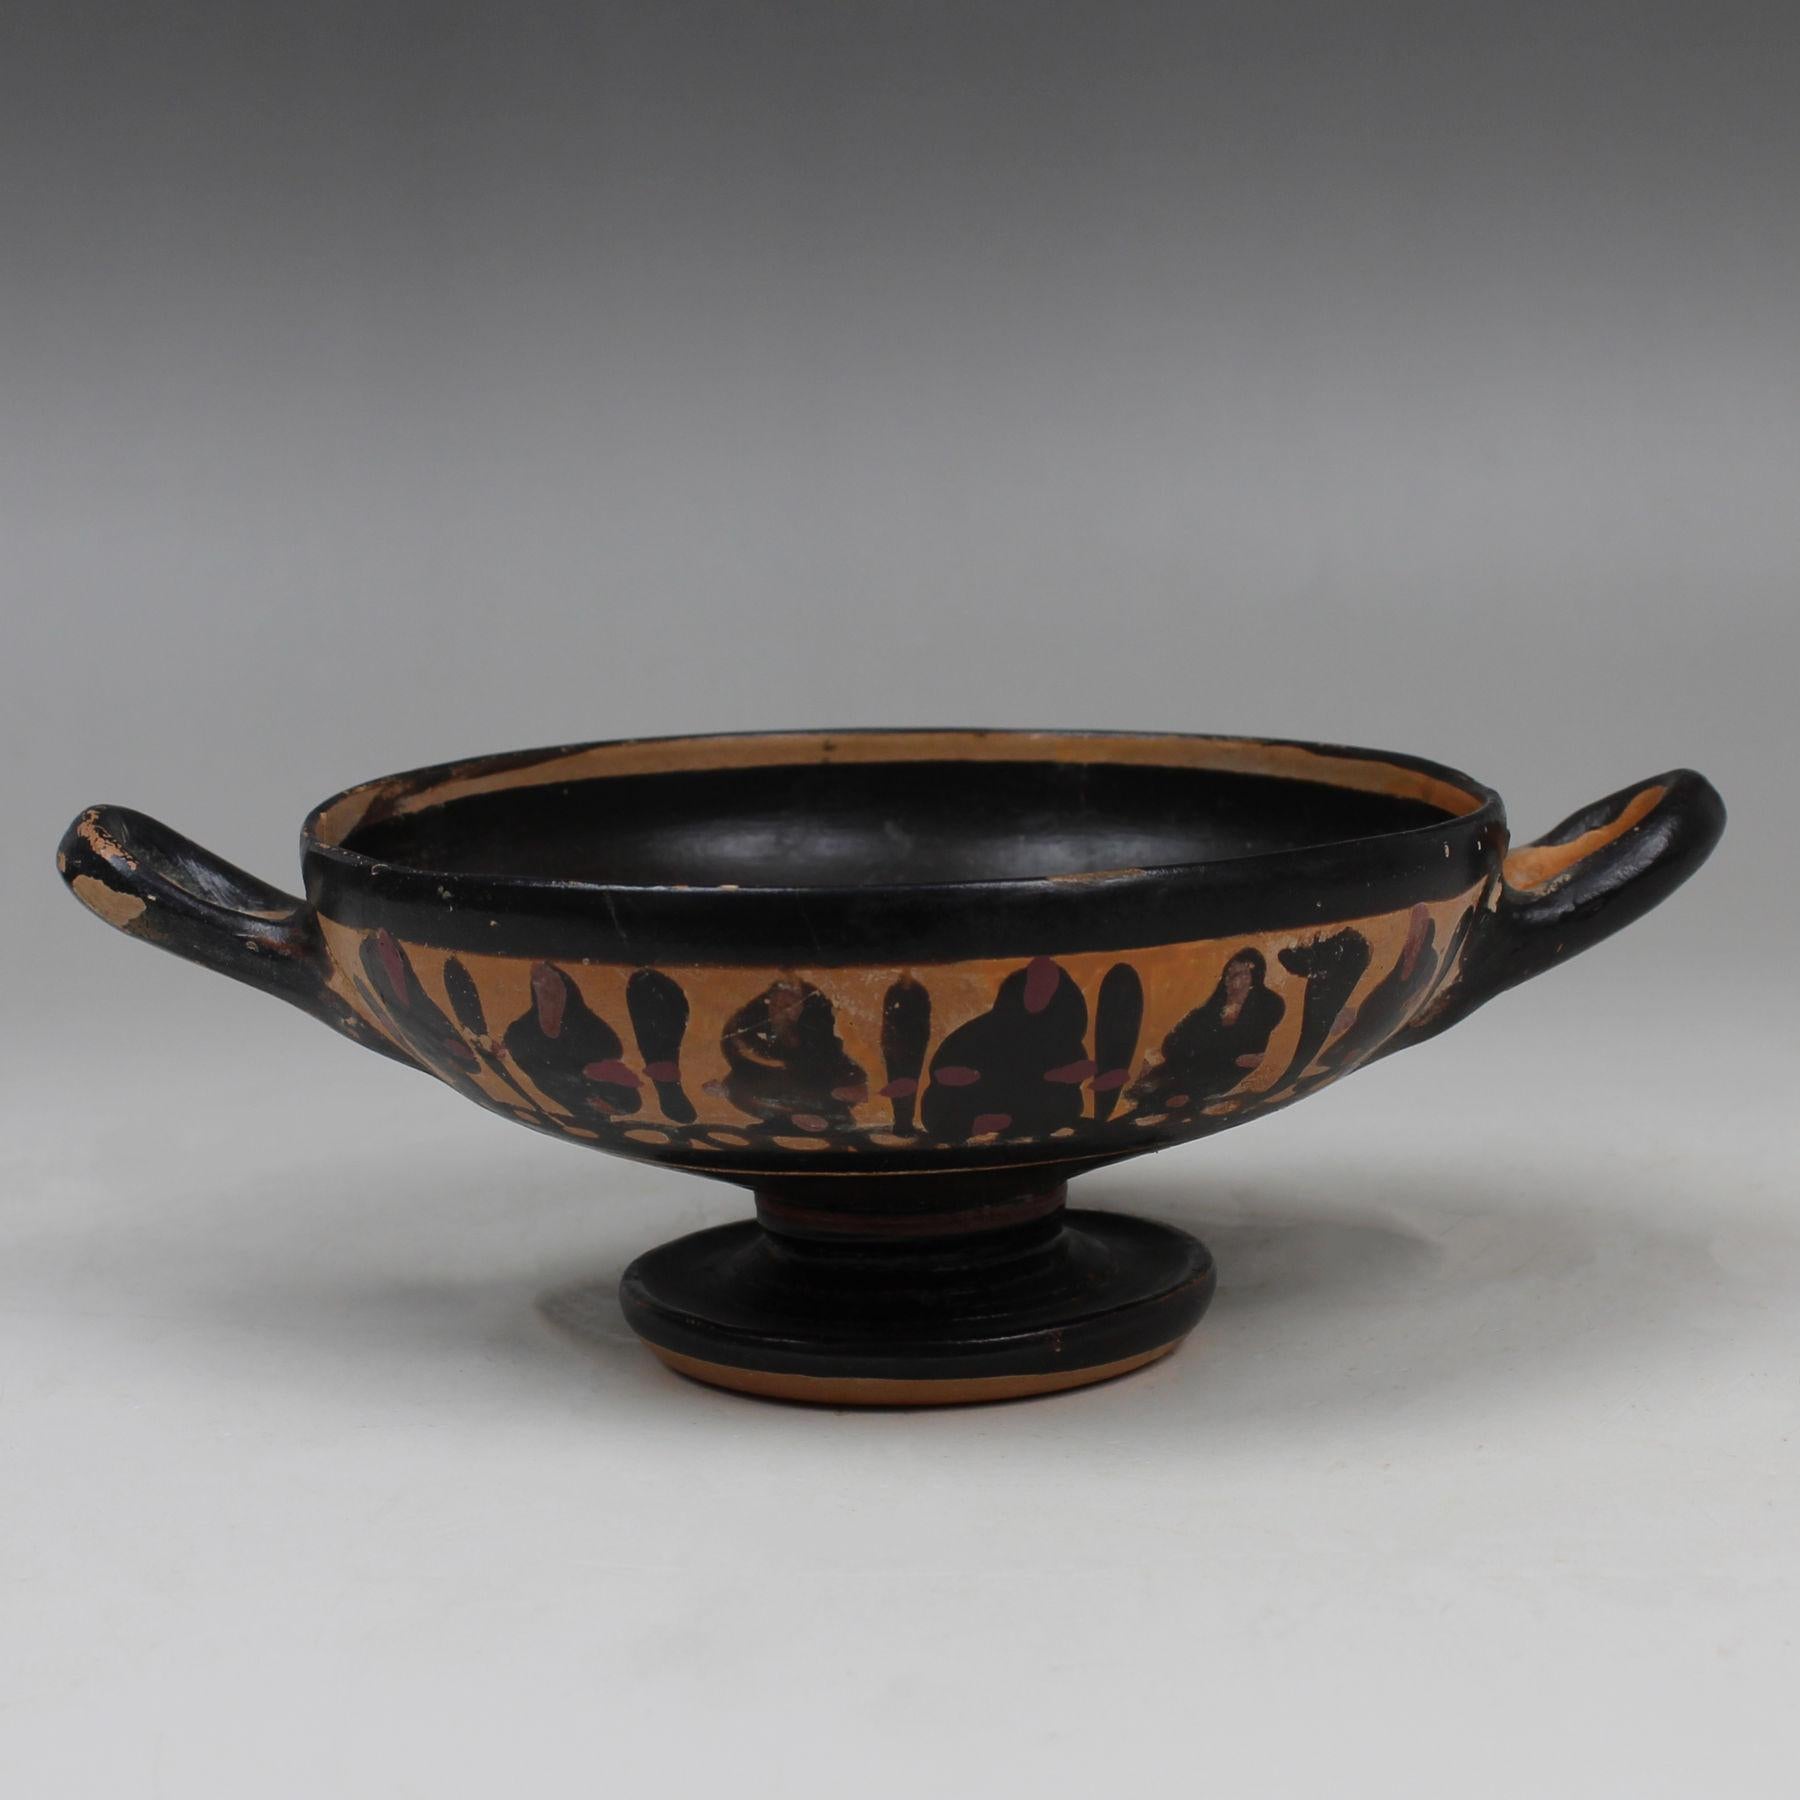 ITEM: Kylix
MATERIAL: Pottery
CULTURE: Greek, Apulian
PERIOD: 4th Century B.C
DIMENSIONS: 56 mm x 165 mm x 115 mm
CONDITION: Good condition
PROVENANCE: Ex Belgian private collection, acquired from Christophe Varosi Gallery, Brussels in 2001

Comes